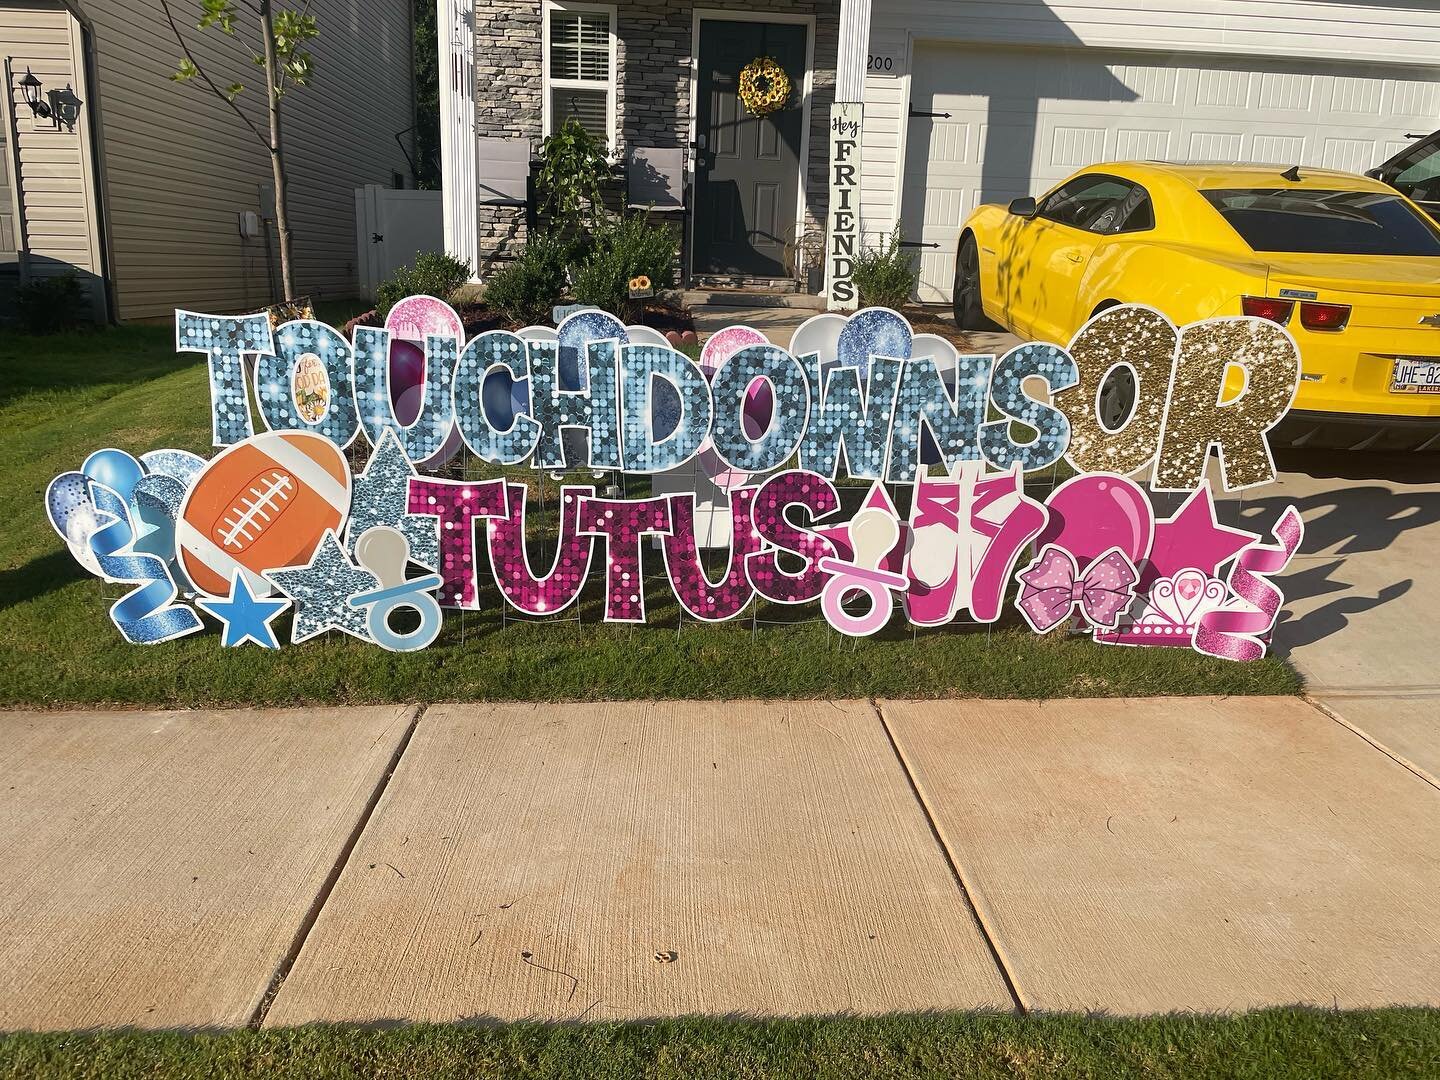 Will it be touchdowns 🏈 or tutus 🩰? We loved celebrating this gender reveal! 😍🥰

#Harrisburgyardcard #harrisburgnc #concordnc #midlandnc #yardcard #yardsign #happybirthday #party #celebrate #sayitintheyard #supportlocal